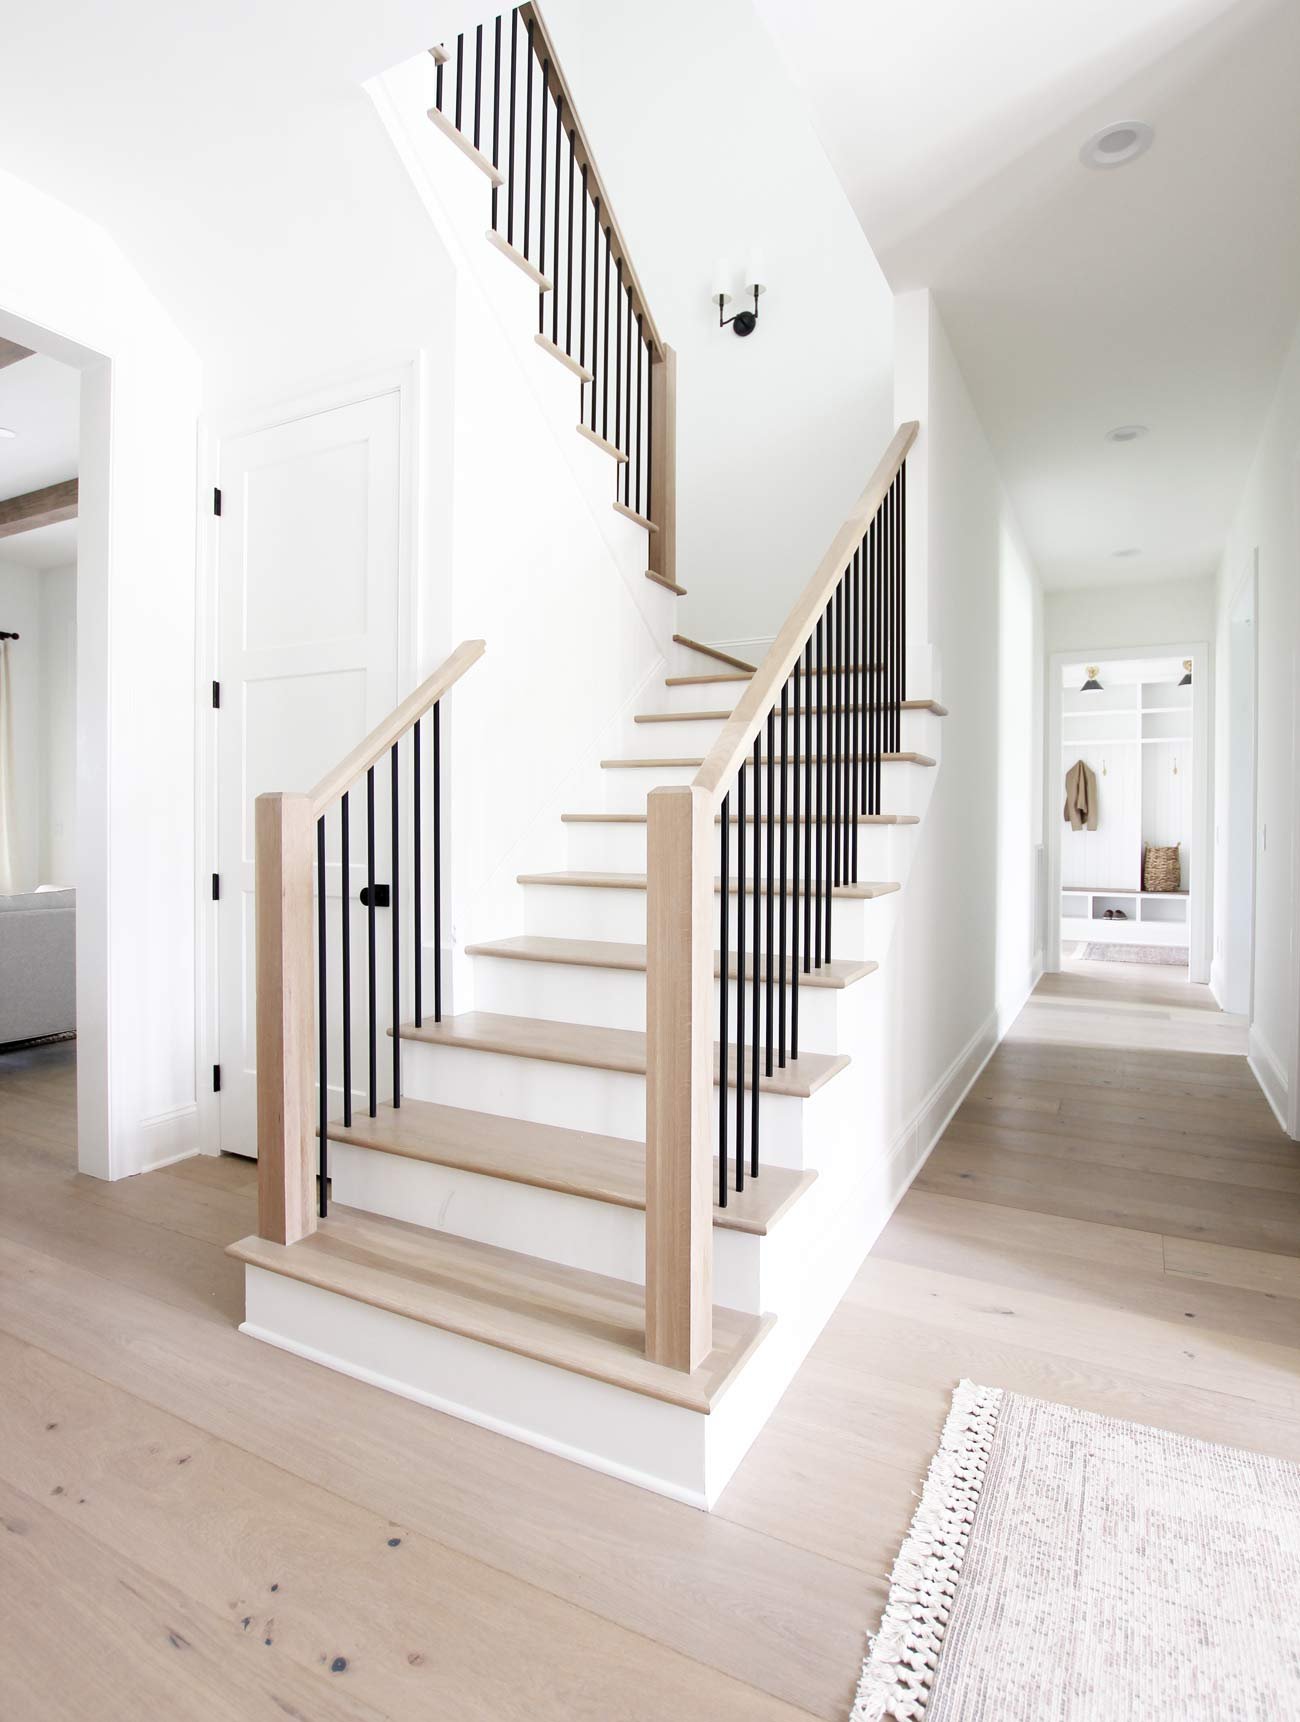 Stylish staircase ideas to suit every space